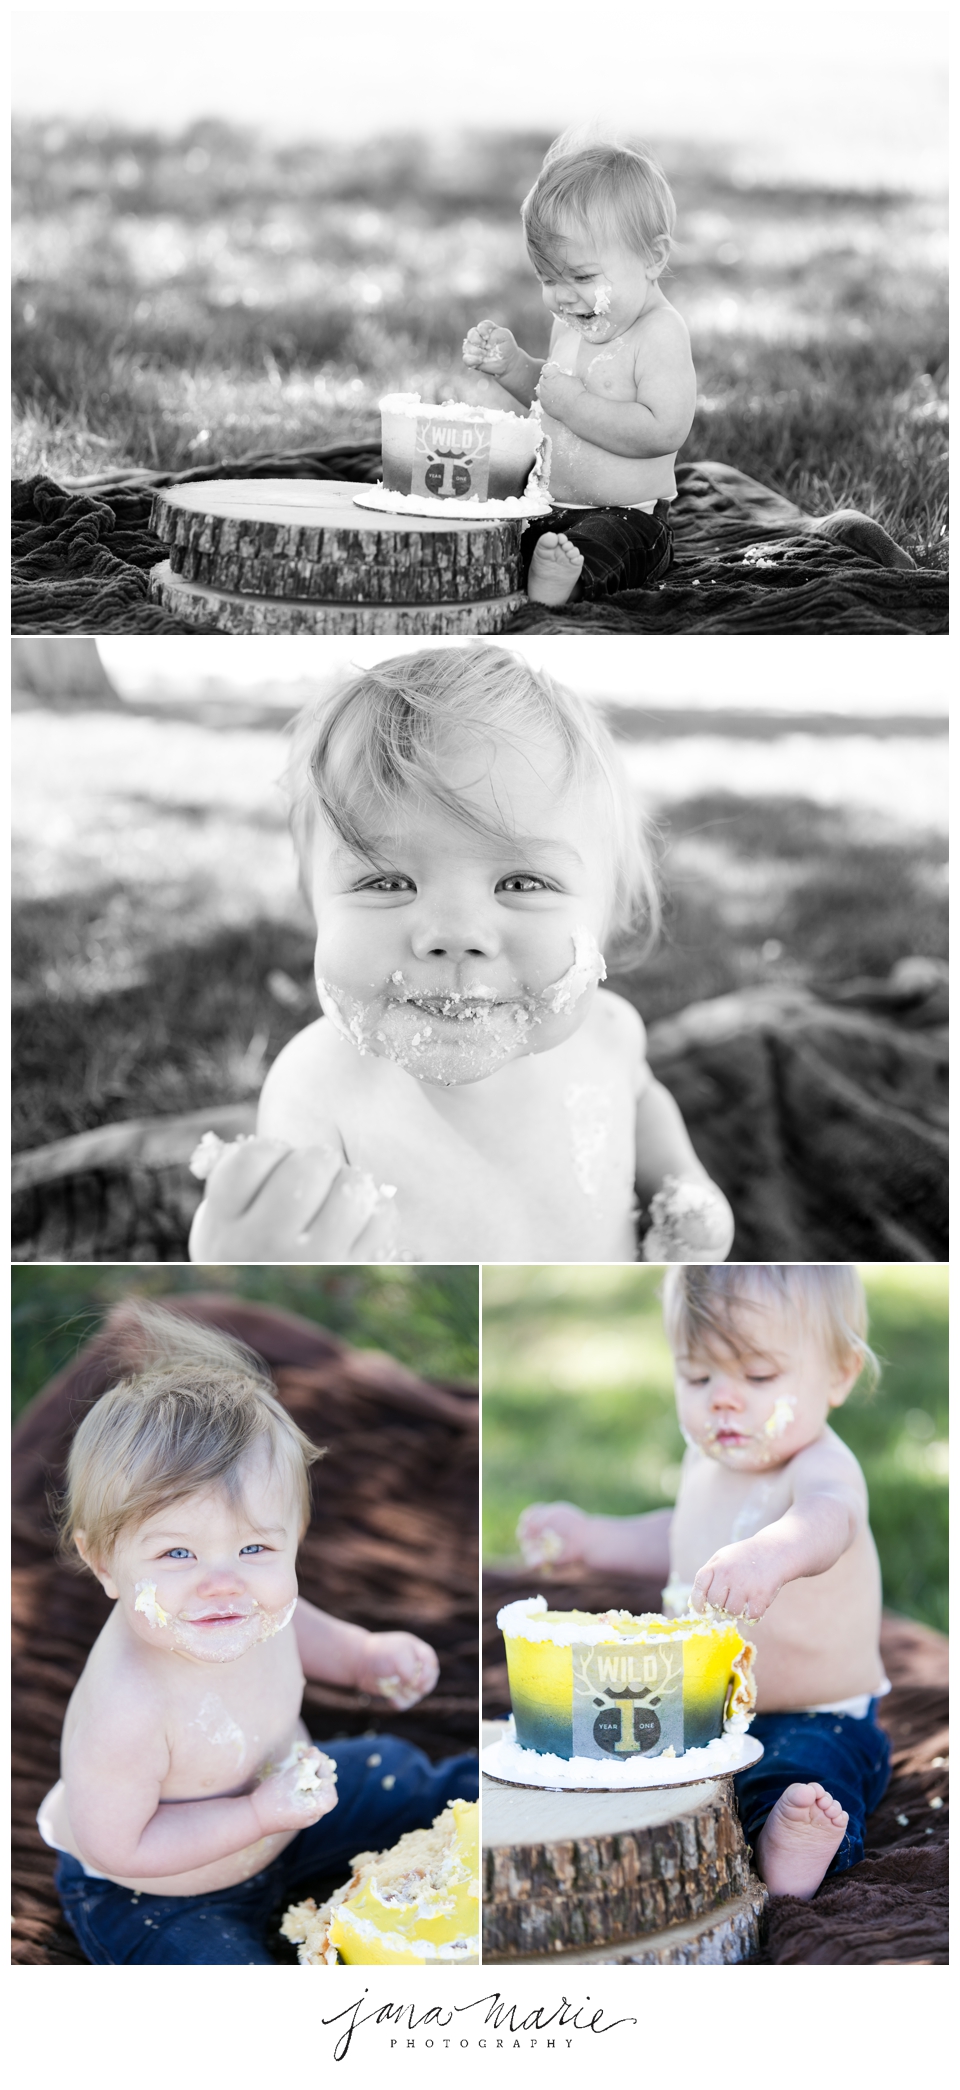 First birthday, One year old, Cake smash, Children photographer, Kids, portraits, blue springs lake, blue springs photographer